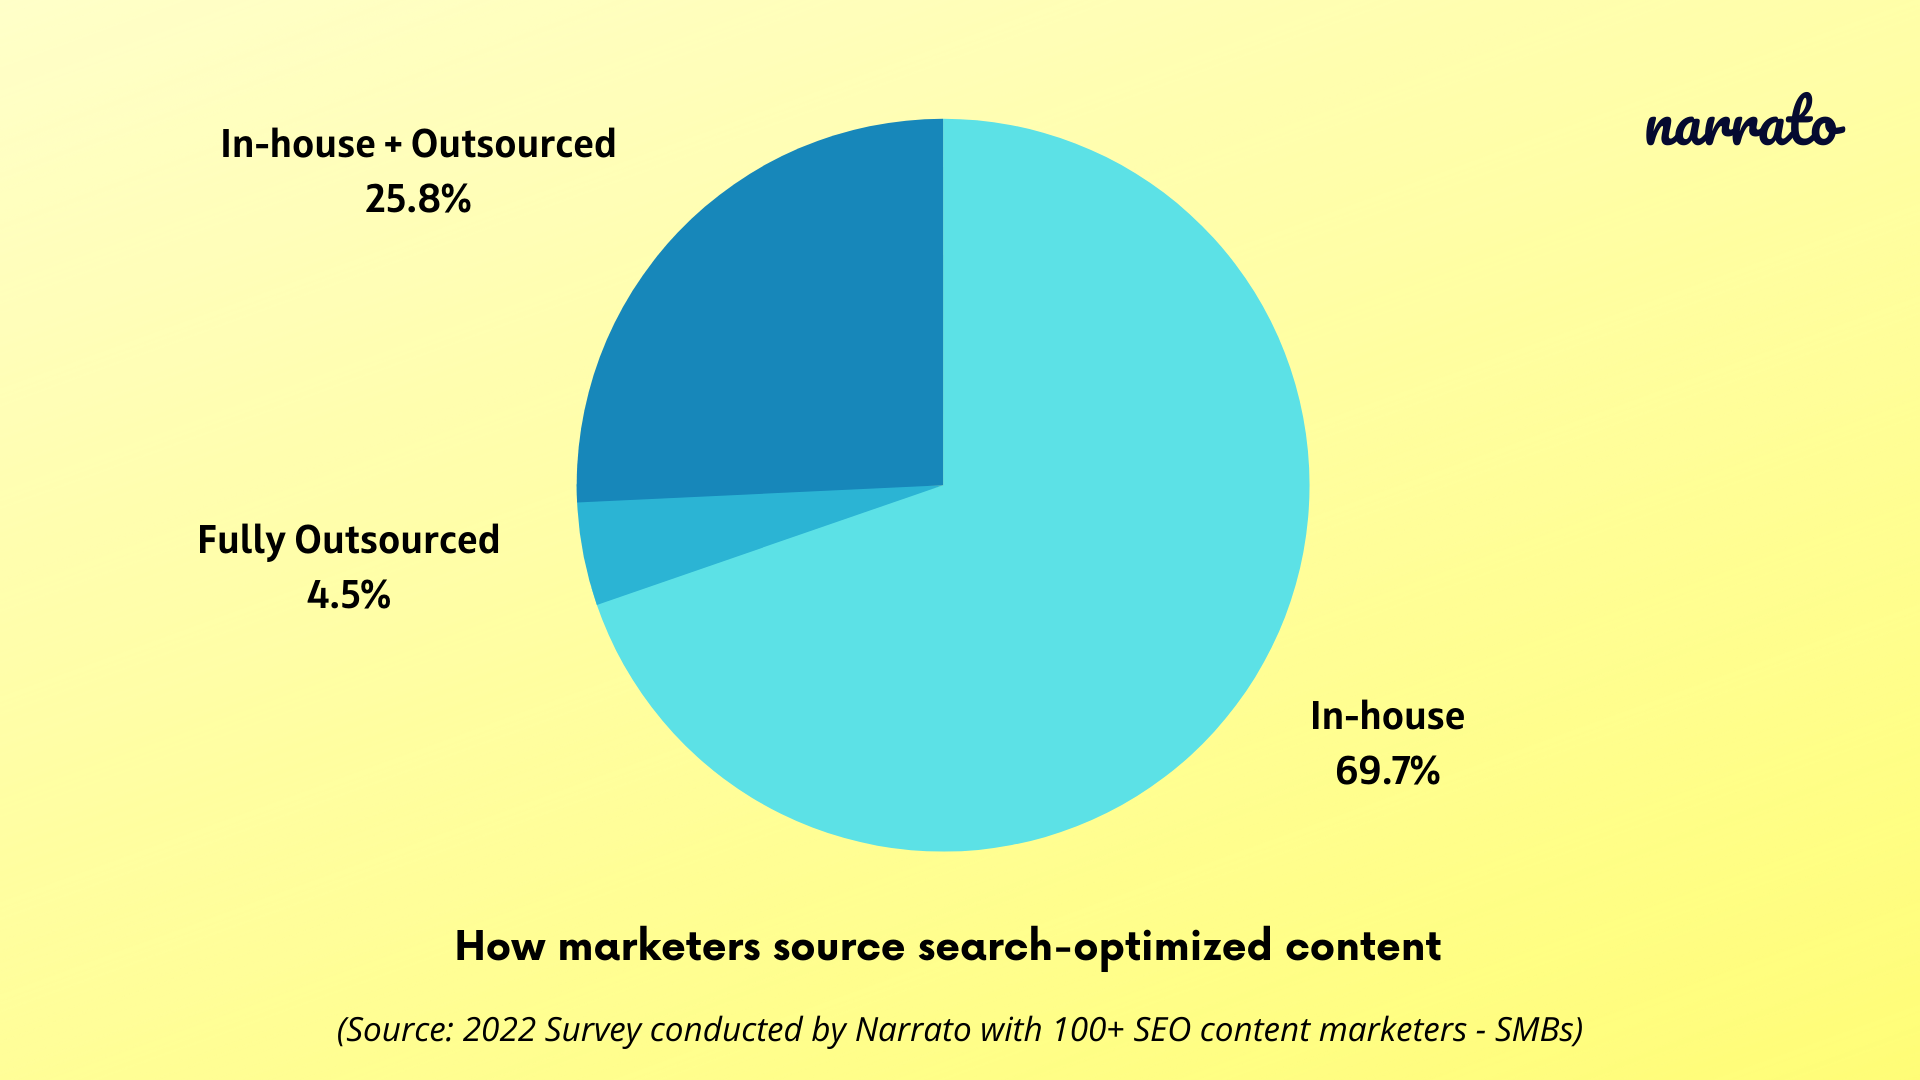 How marketers source content - Narrato interview on SEO planning and content sourcing